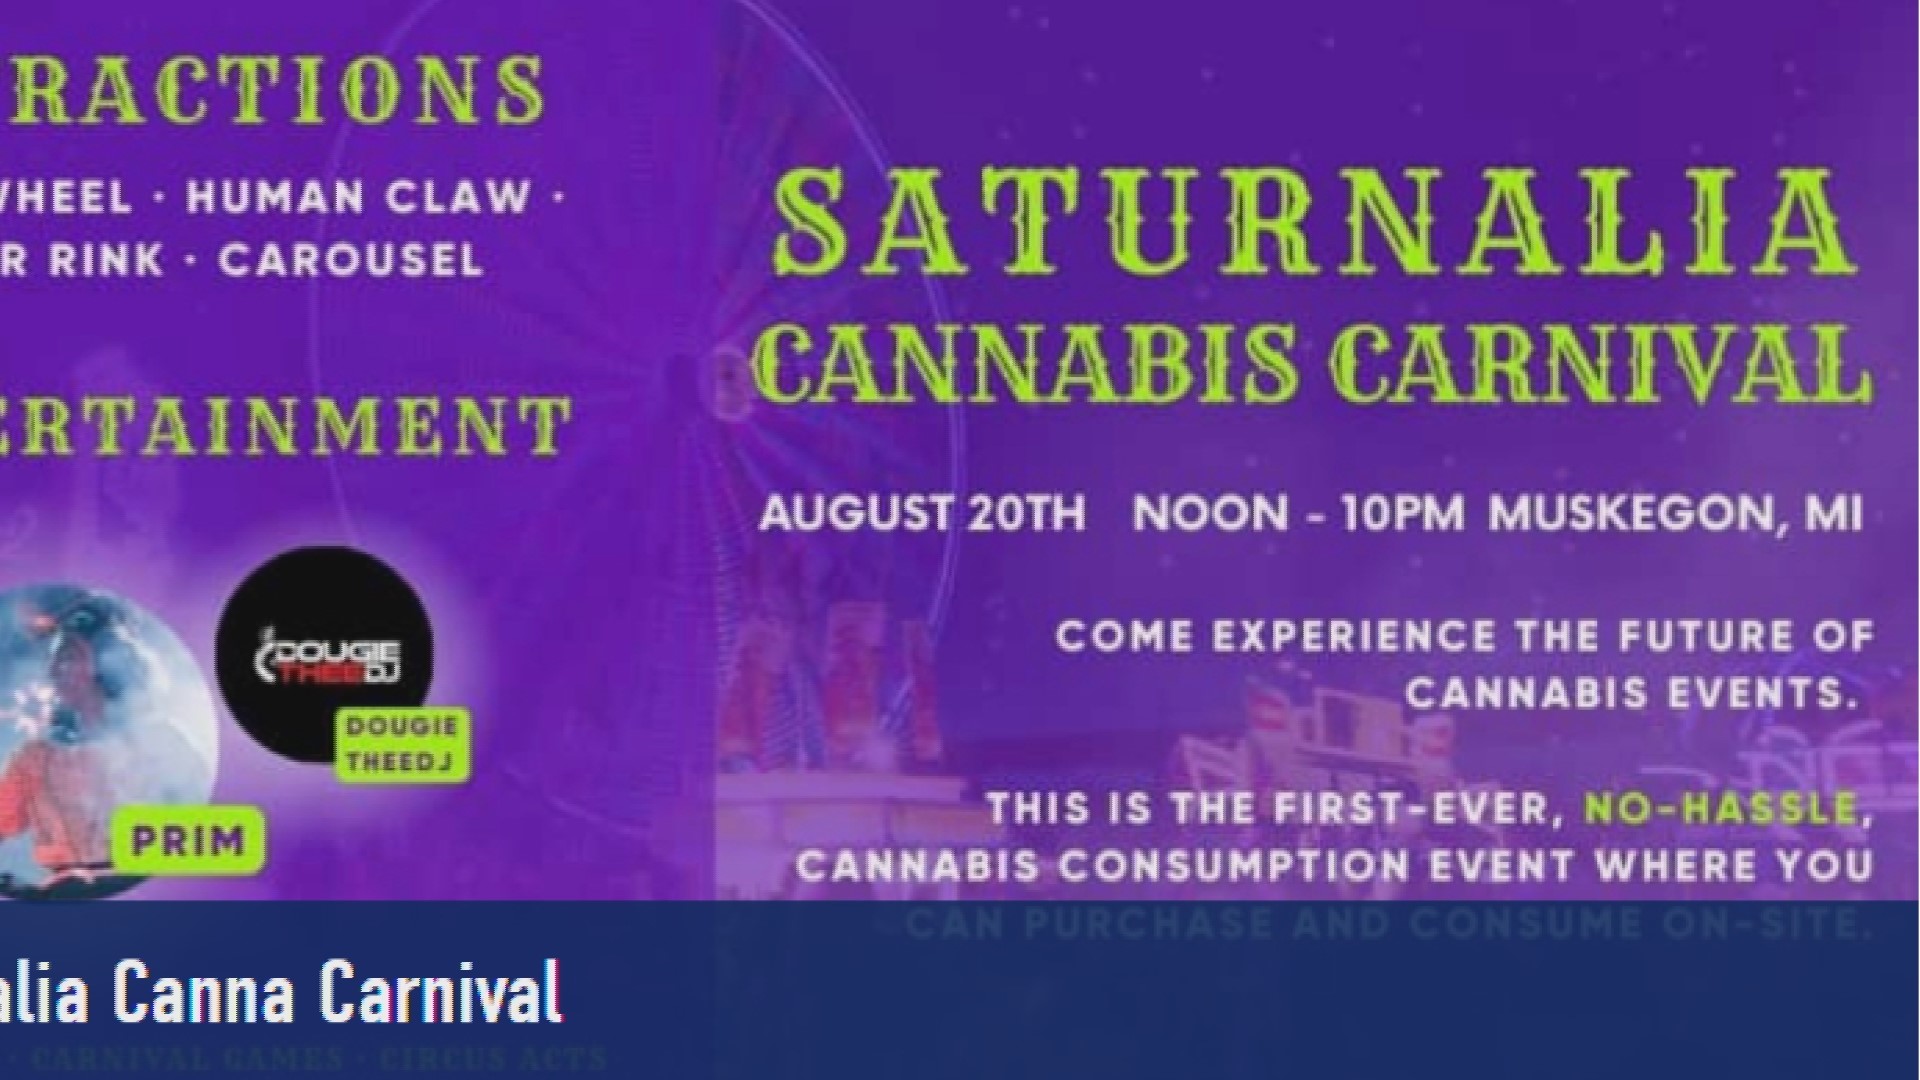 Controversy surrounding a marijuana event that went live in Muskegon last weekend.